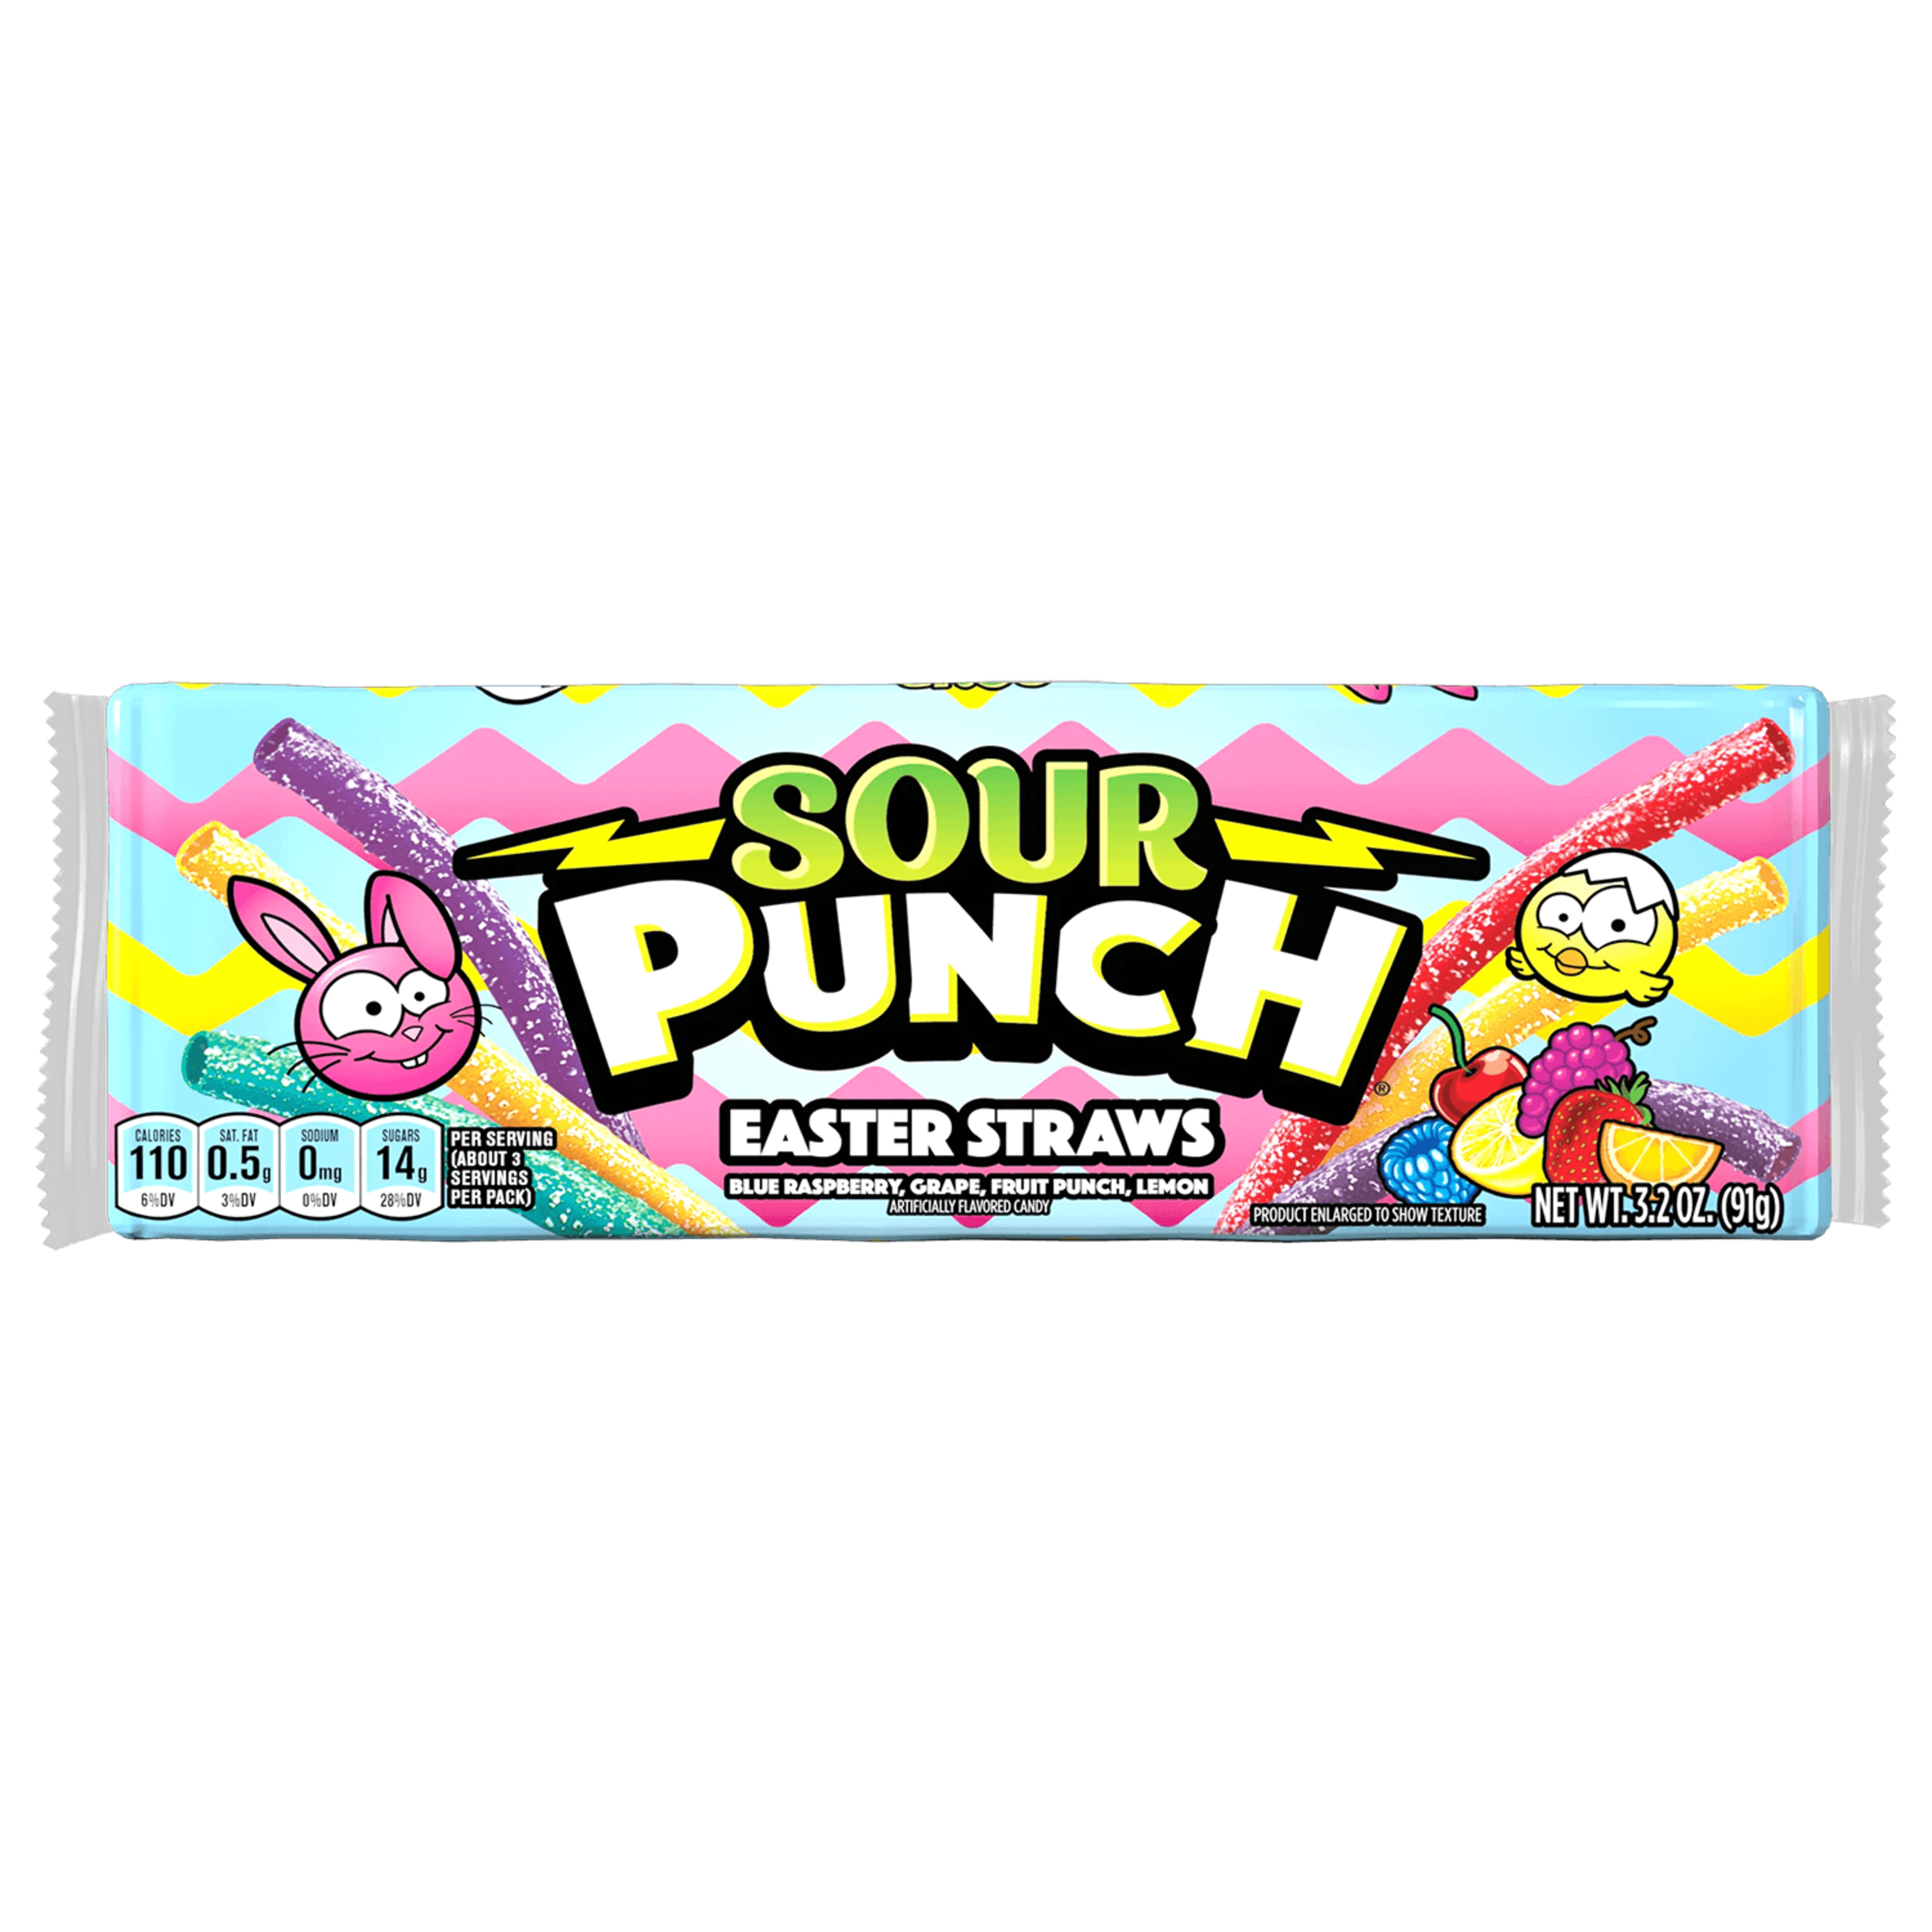 SOUR PUNCH Easter Candy Straws front of candy tray